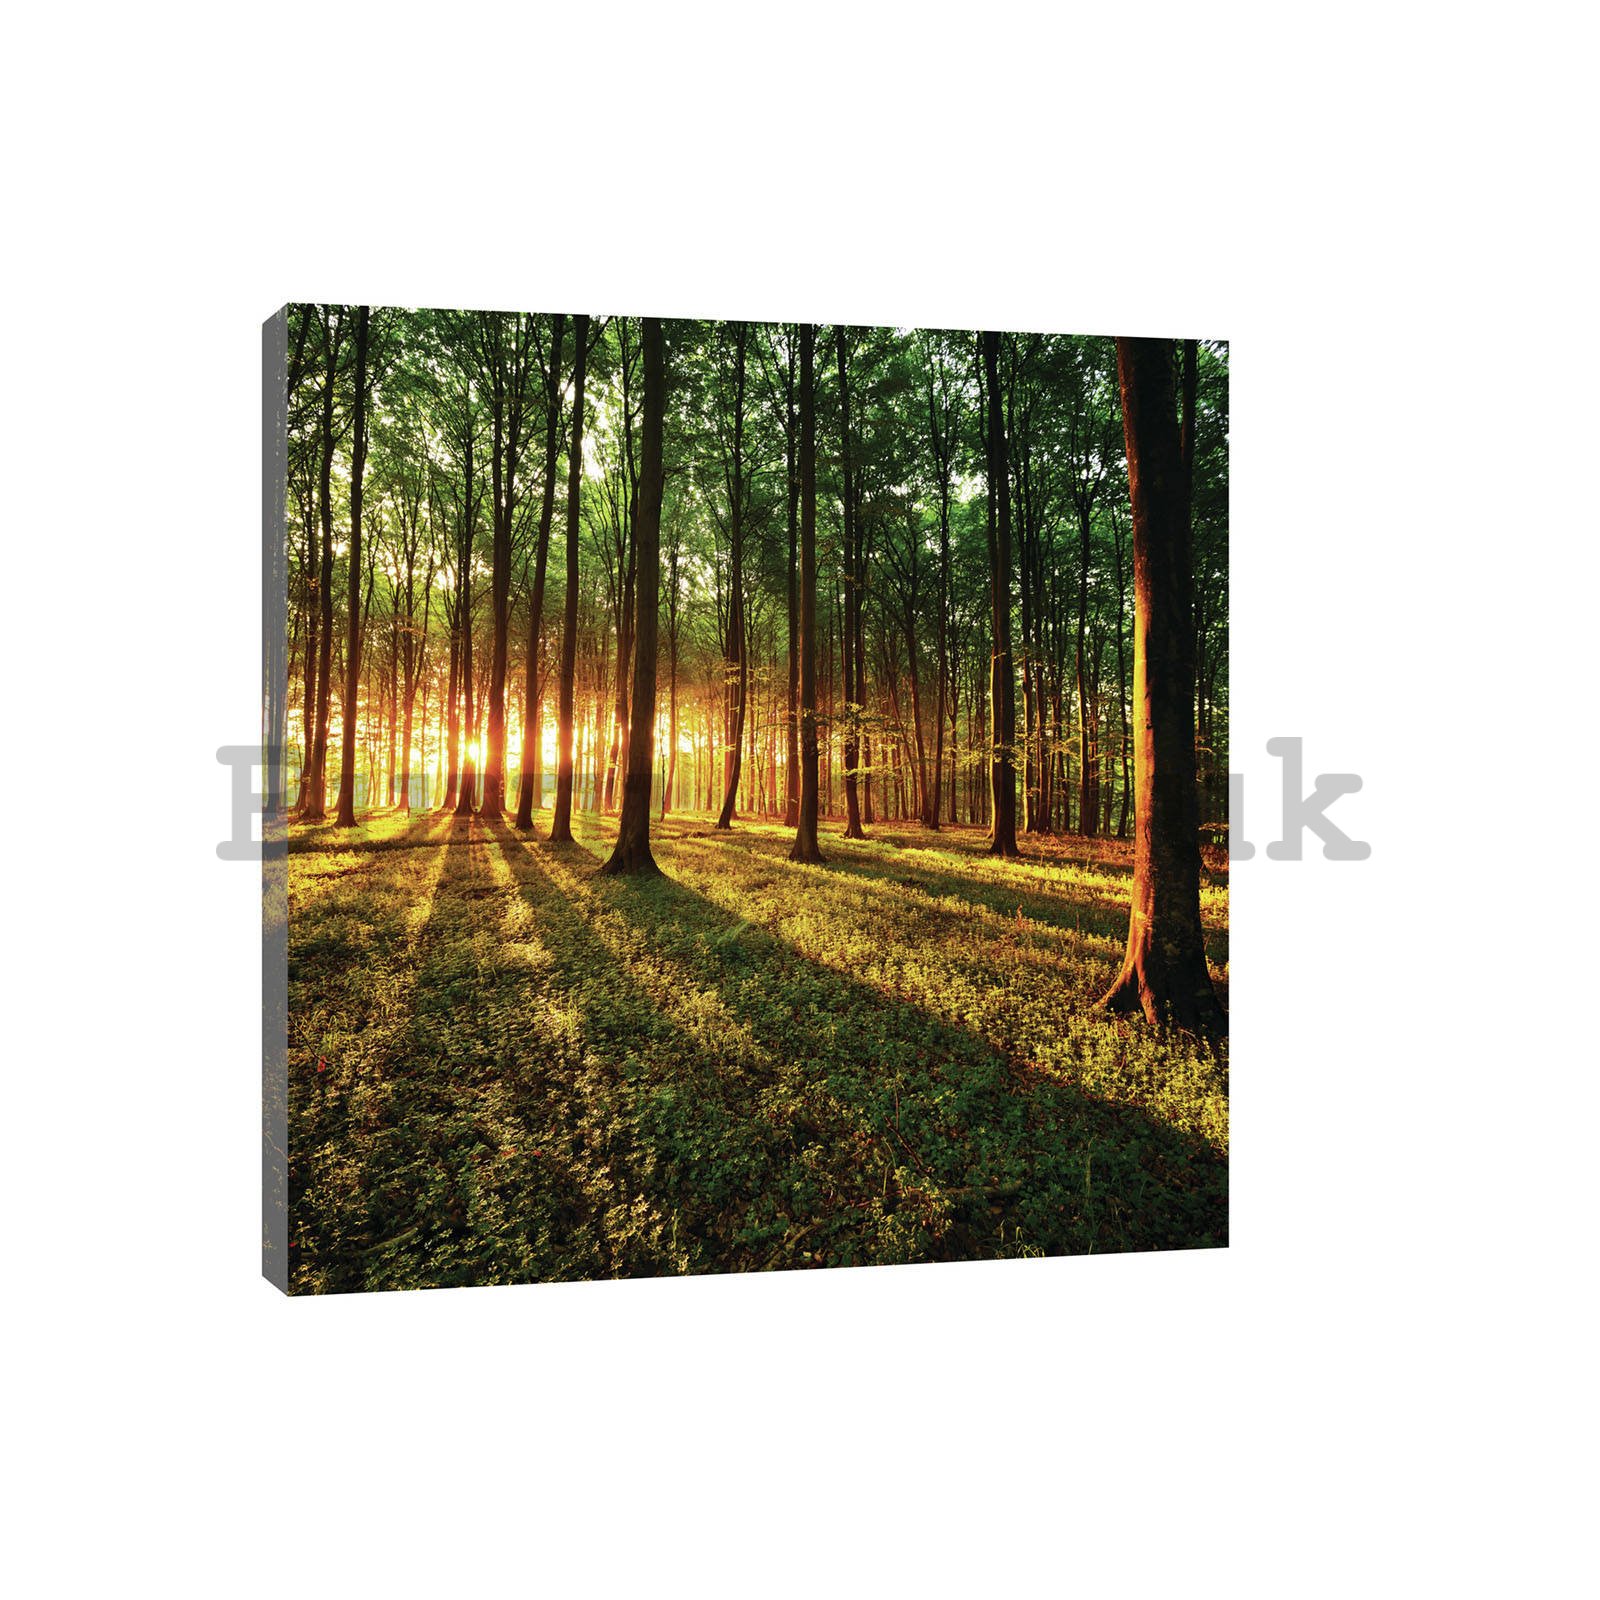 Painting on canvas: Sunset in the Forest - 80x60 cm